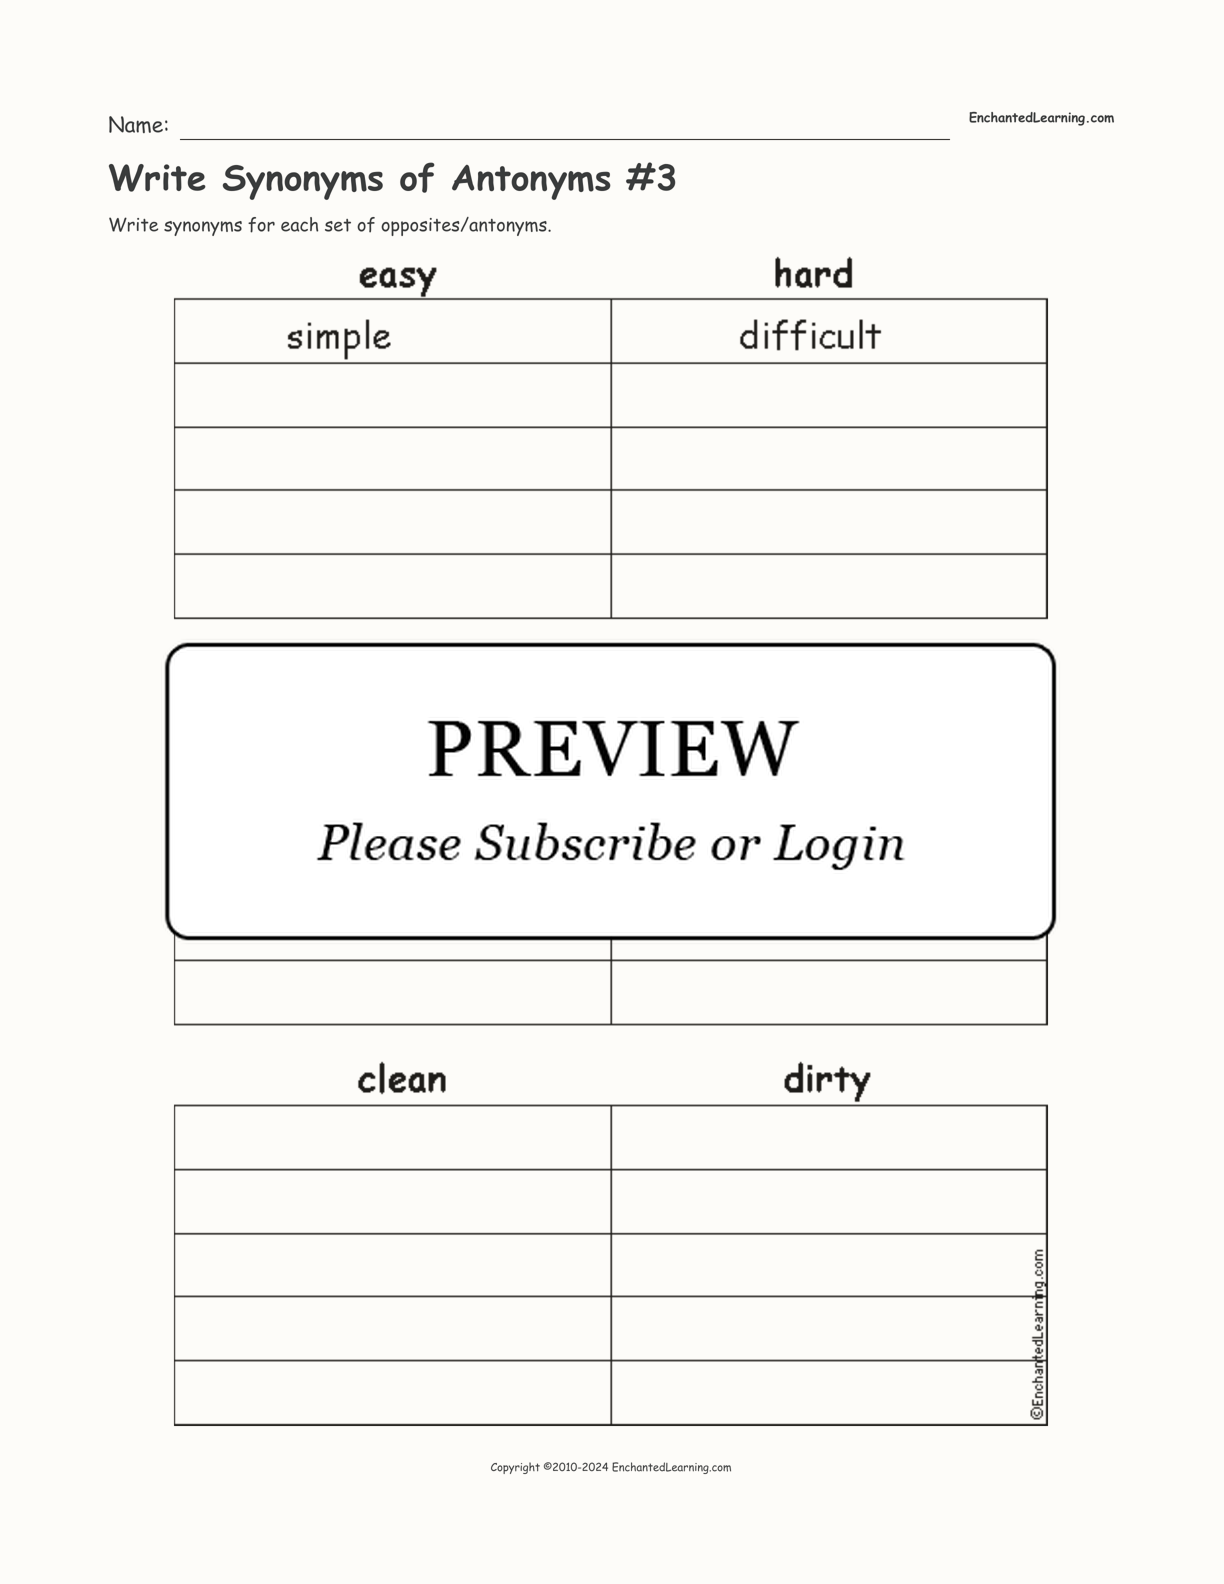 Write Synonyms of Antonyms #3 interactive worksheet page 1